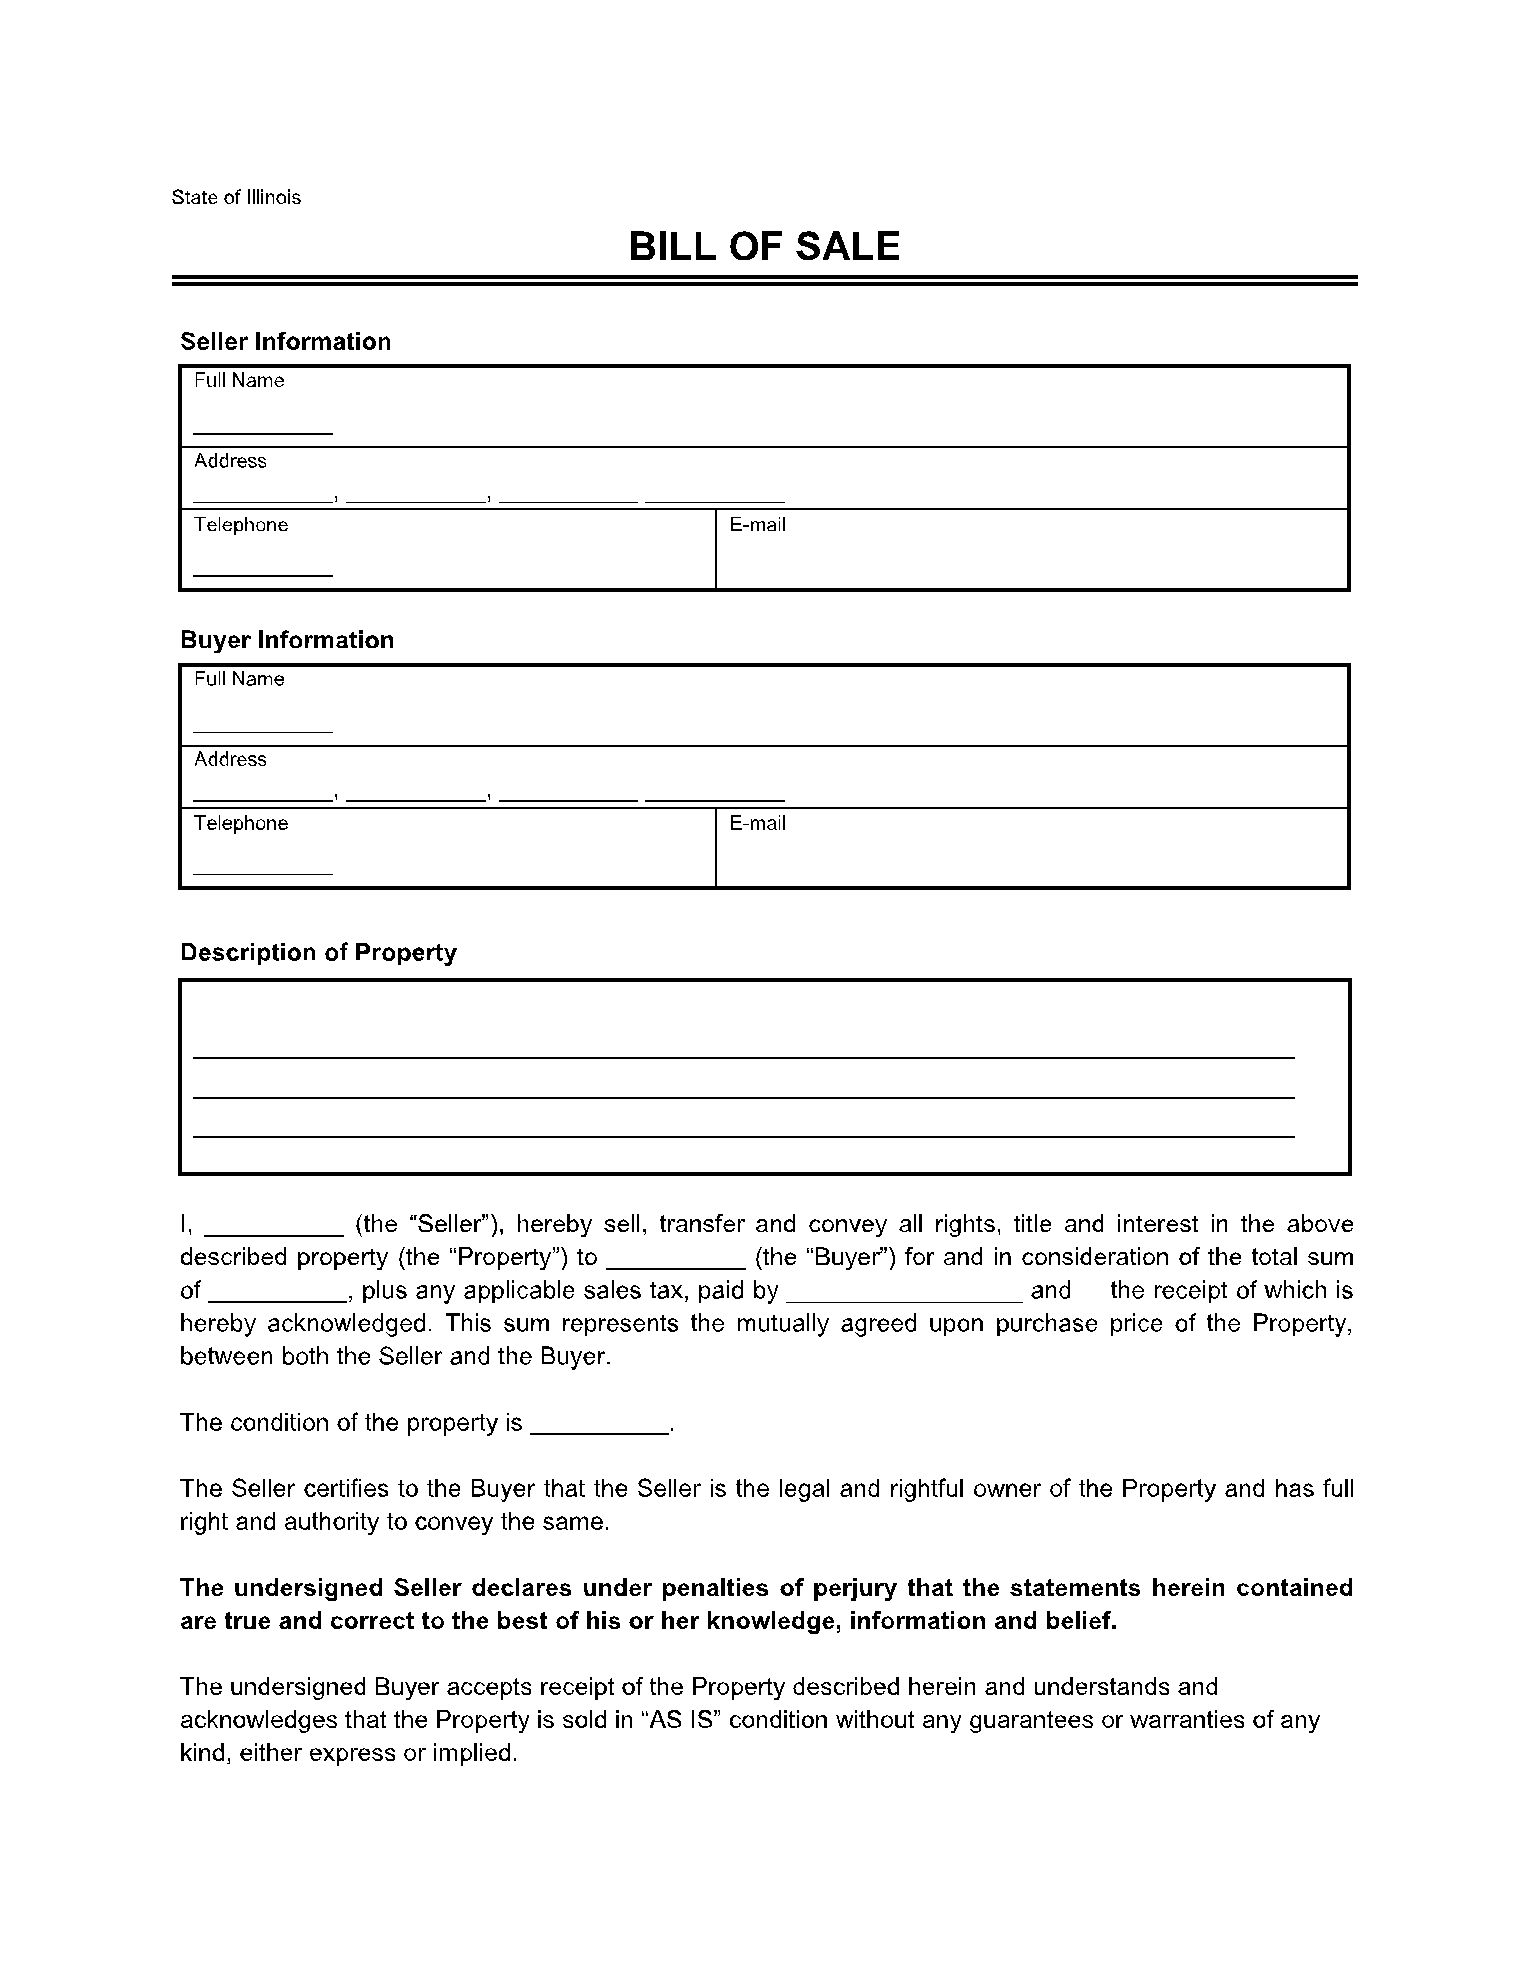 Bill of Sale Forms in Illinois